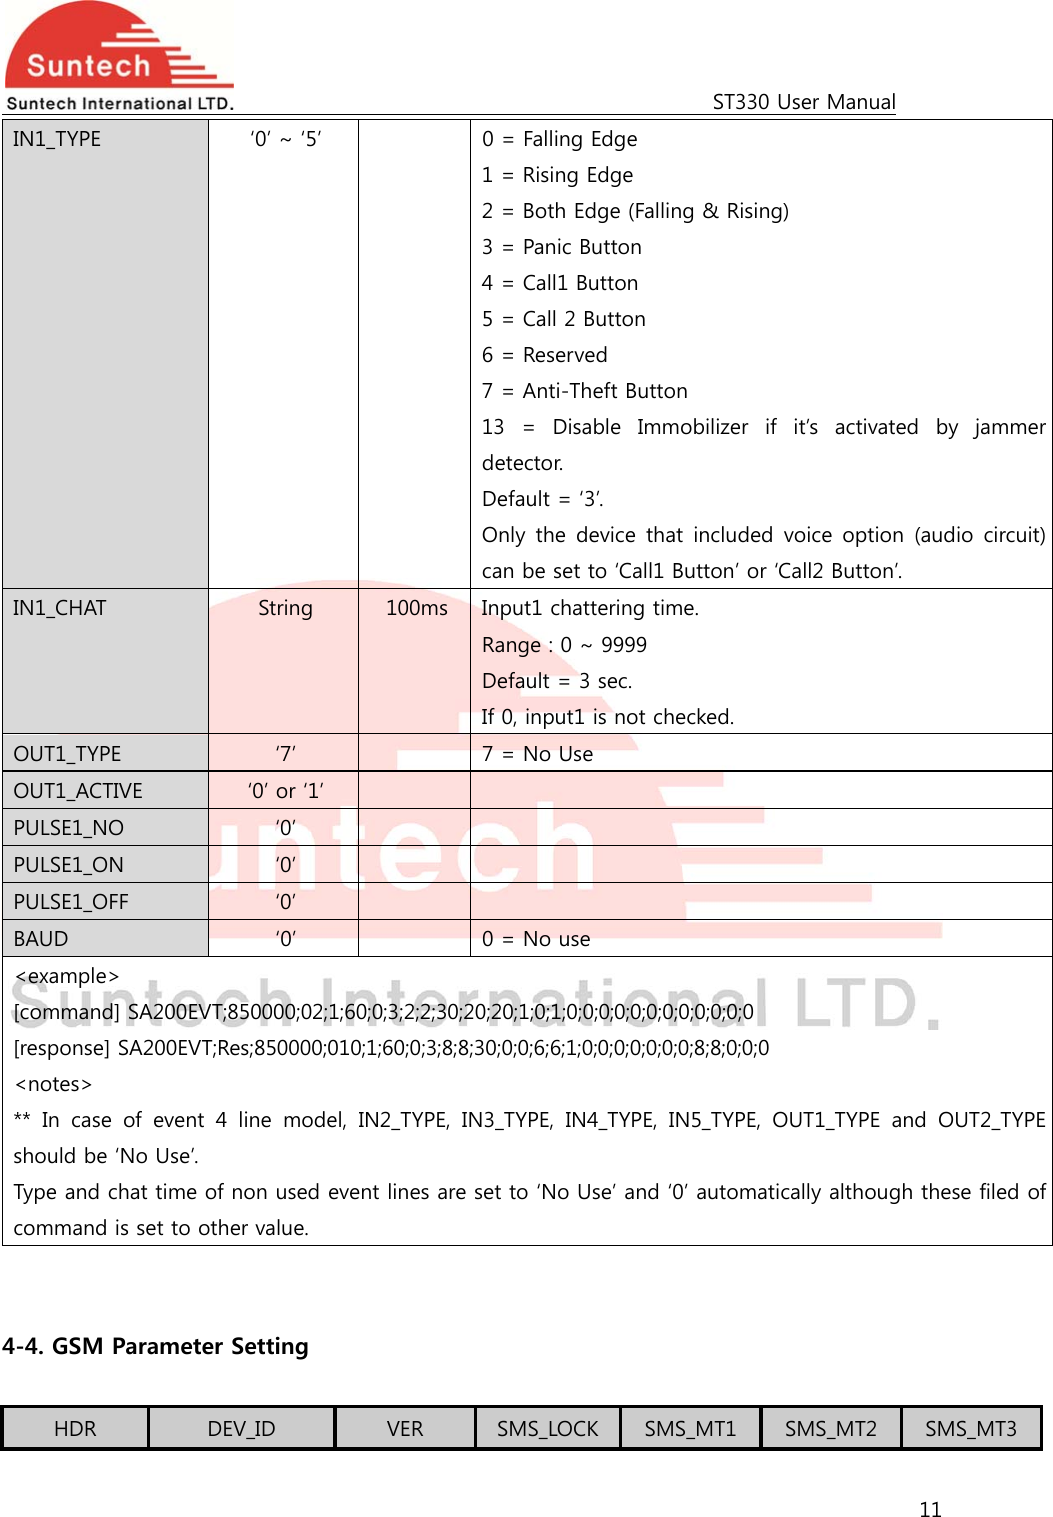                                                                                             ST330 User Manual 11  IN1_TYPE  ‘0’ ~ ‘5’    0 = Falling Edge 1 = Rising Edge 2 = Both Edge (Falling &amp; Rising) 3 = Panic Button 4 = Call1 Button 5 = Call 2 Button 6 = Reserved 7 = Anti-Theft Button 13  =  Disable  Immobilizer  if  it’s  activated  by  jammer detector. Default = ‘3’. Only  the  device  that  included  voice  option  (audio  circuit) can be set to ‘Call1 Button’ or ‘Call2 Button’. IN1_CHAT  String  100ms  Input1 chattering time.   Range : 0 ~ 9999 Default = 3 sec. If 0, input1 is not checked. OUT1_TYPE  ‘7’    7 = No Use OUT1_ACTIVE  ‘0’ or ‘1’     PULSE1_NO  ‘0’     PULSE1_ON  ‘0’     PULSE1_OFF  ‘0’     BAUD  ‘0’    0 = No use &lt;example&gt; [command] SA200EVT;850000;02;1;60;0;3;2;2;30;20;20;1;0;1;0;0;0;0;0;0;0;0;0;0;0;0 [response] SA200EVT;Res;850000;010;1;60;0;3;8;8;30;0;0;6;6;1;0;0;0;0;0;0;0;8;8;0;0;0 &lt;notes&gt; ** In case of event 4 line model, IN2_TYPE, IN3_TYPE, IN4_TYPE, IN5_TYPE, OUT1_TYPE and OUT2_TYPE should be ‘No Use’. Type and chat time of non used event lines are set to ‘No Use’ and ‘0’ automatically although these filed of command is set to other value.   4-4. GSM Parameter Setting  HDR  DEV_ID  VER  SMS_LOCK  SMS_MT1  SMS_MT2  SMS_MT3 